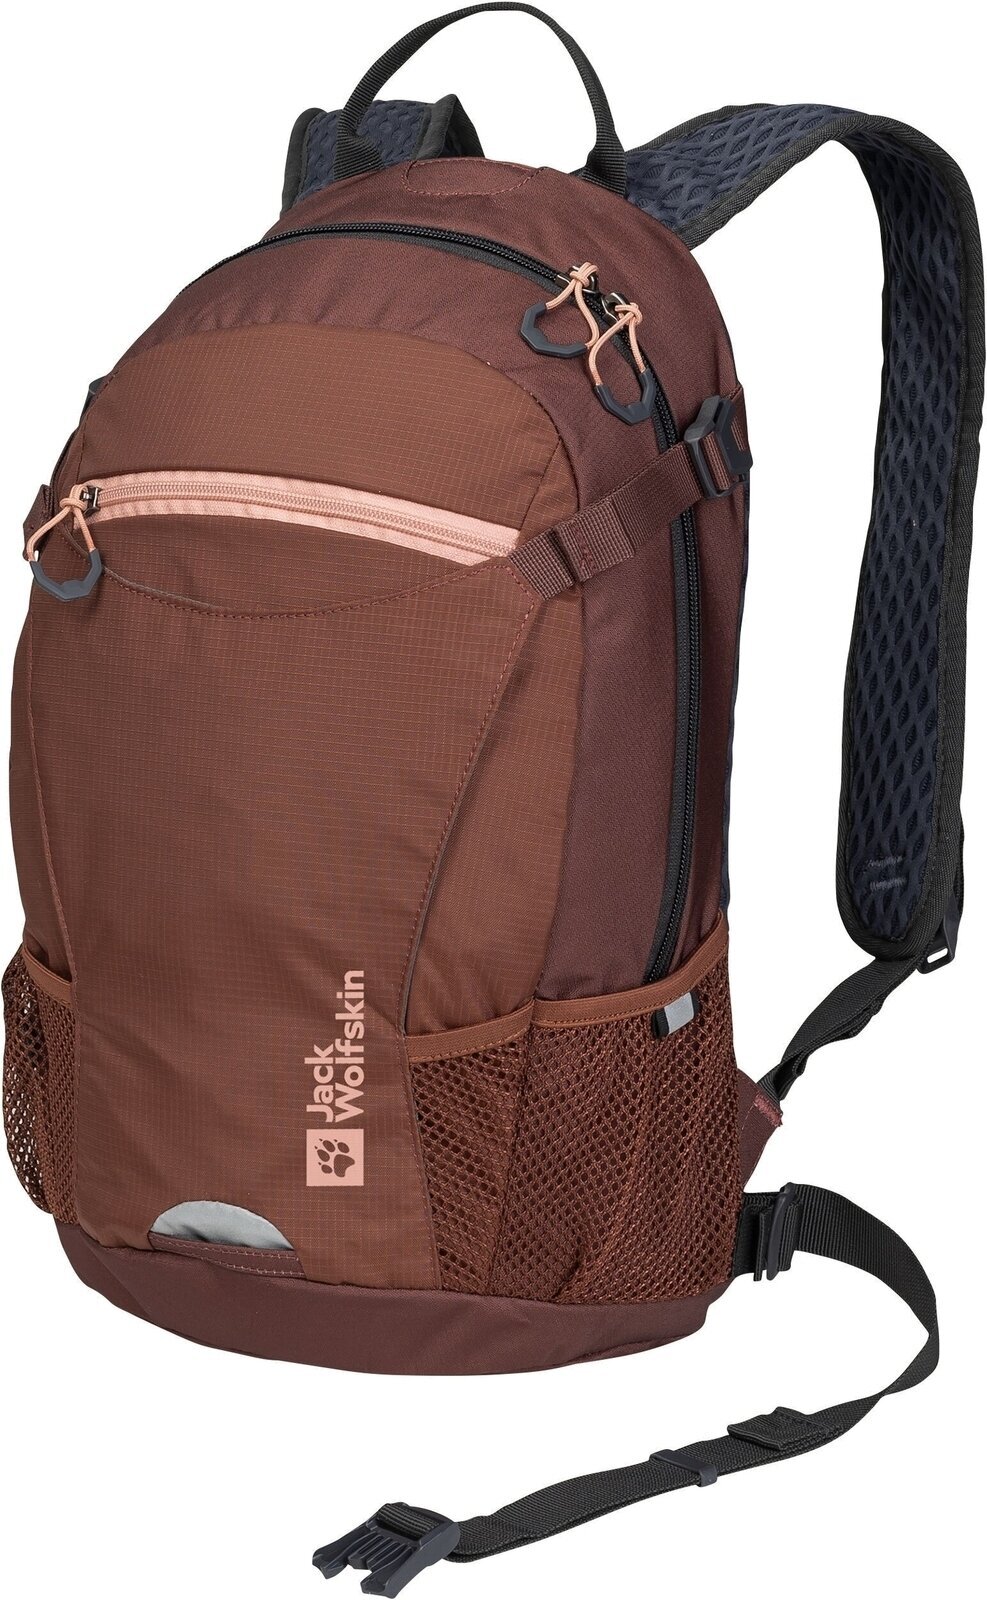 Cycling backpack and accessories Jack Wolfskin Velocity 12 Dark Rust Backpack